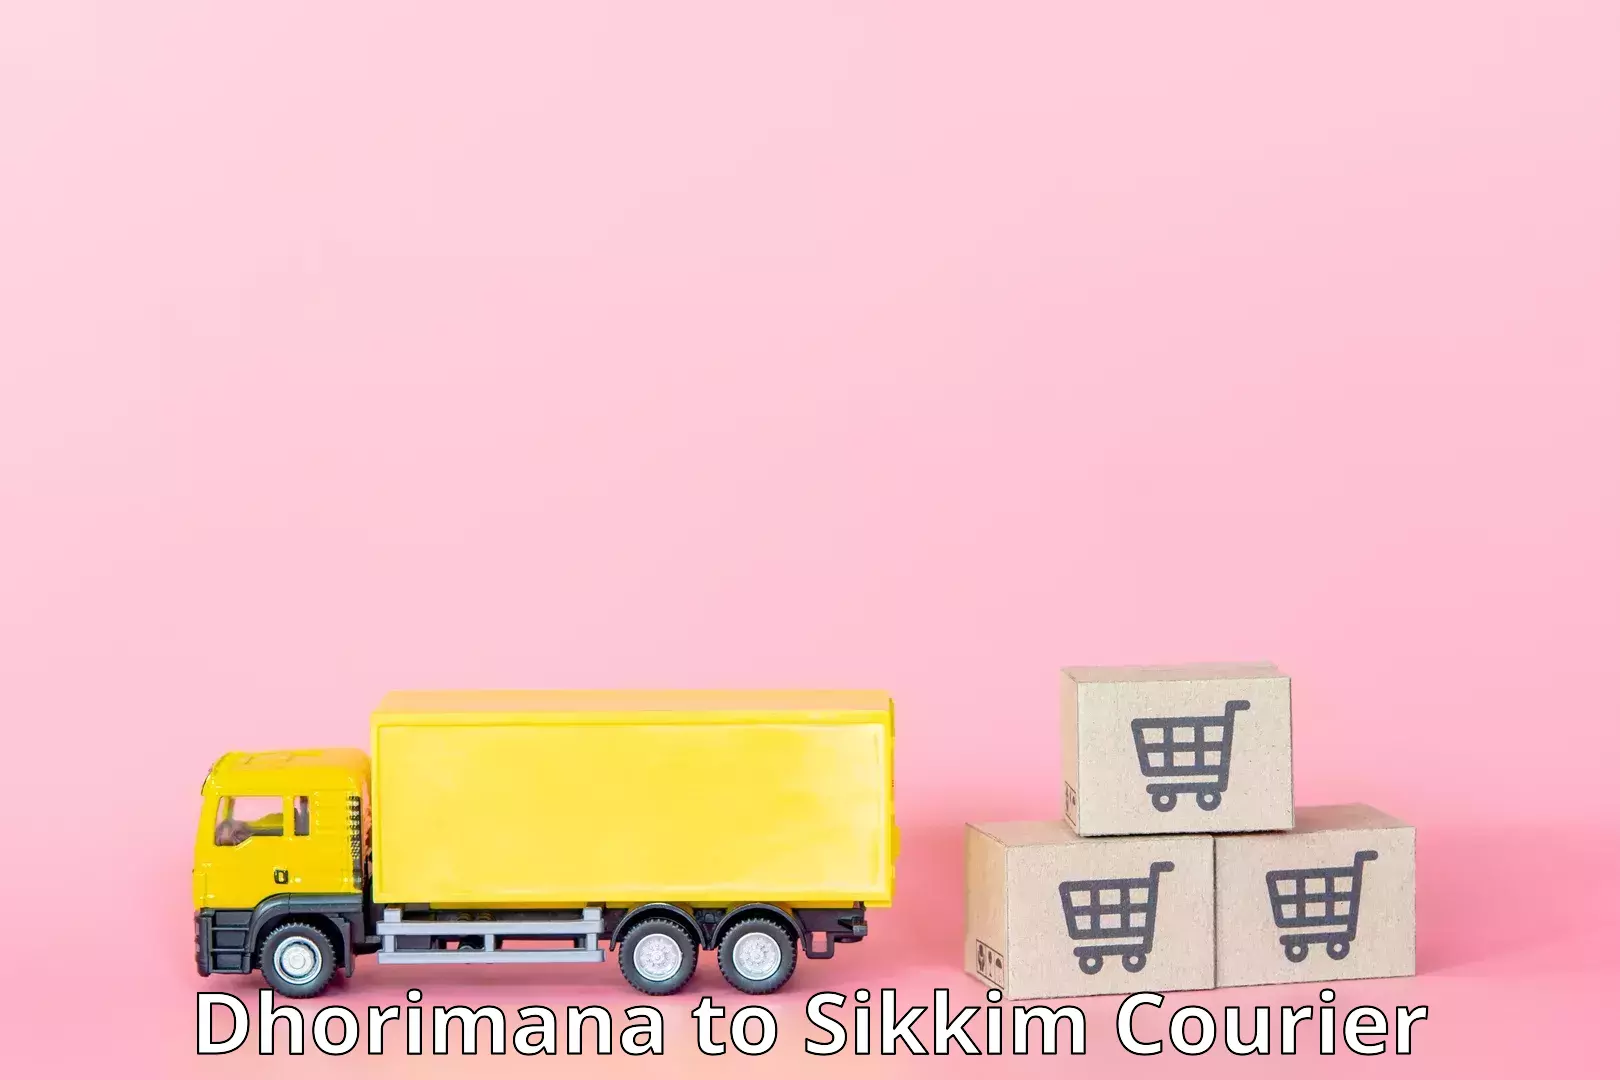 Efficient order fulfillment in Dhorimana to South Sikkim